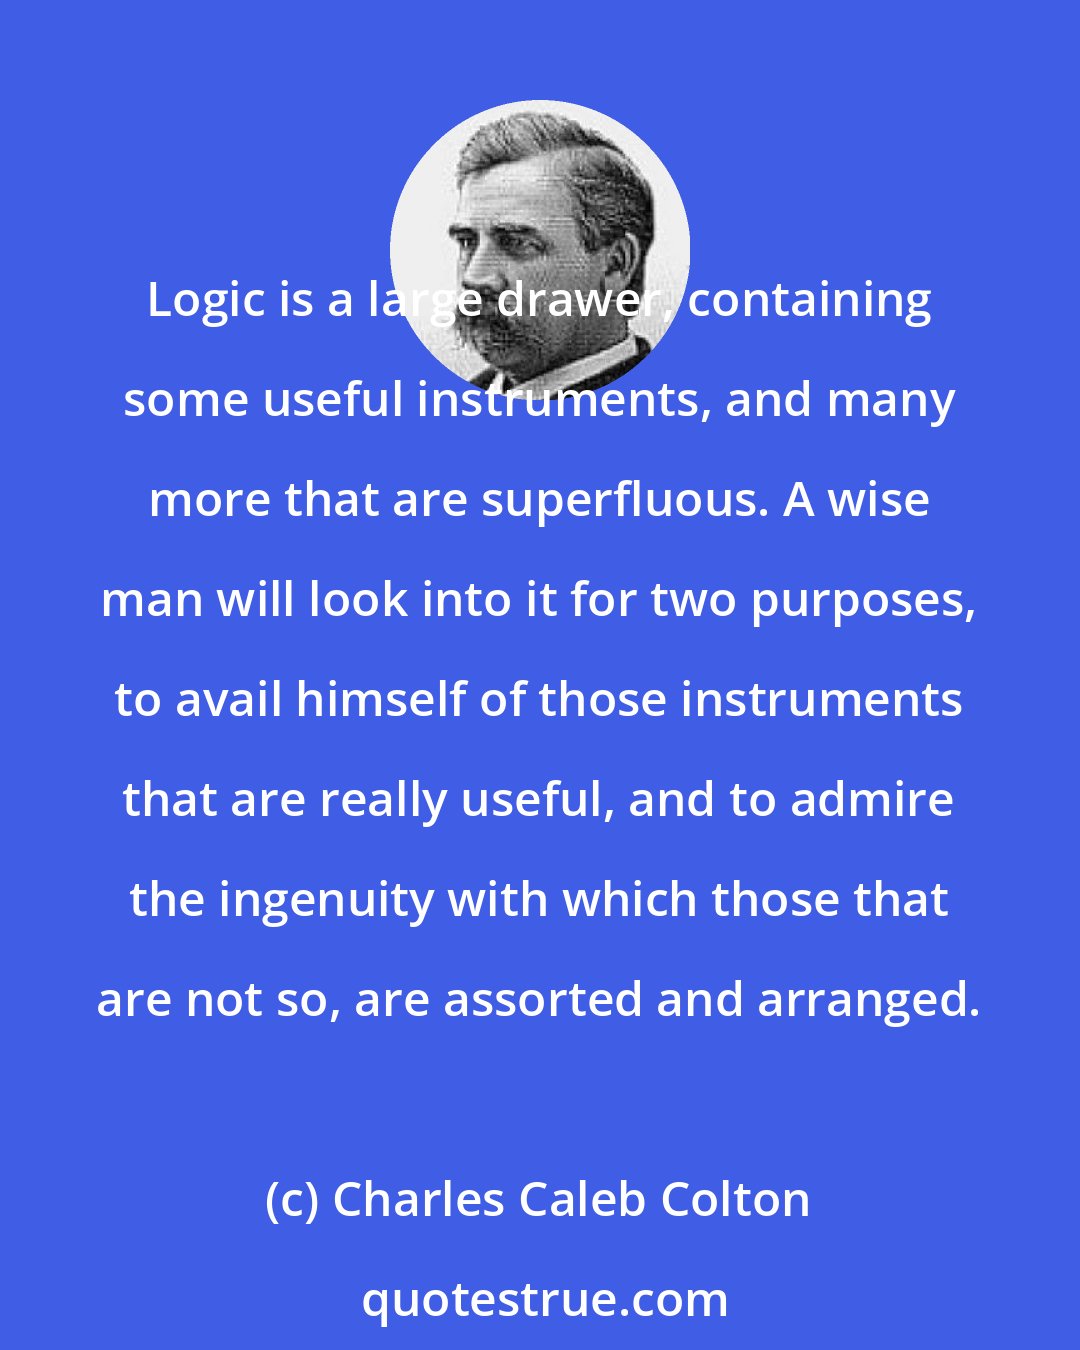 Charles Caleb Colton: Logic is a large drawer, containing some useful instruments, and many more that are superfluous. A wise man will look into it for two purposes, to avail himself of those instruments that are really useful, and to admire the ingenuity with which those that are not so, are assorted and arranged.